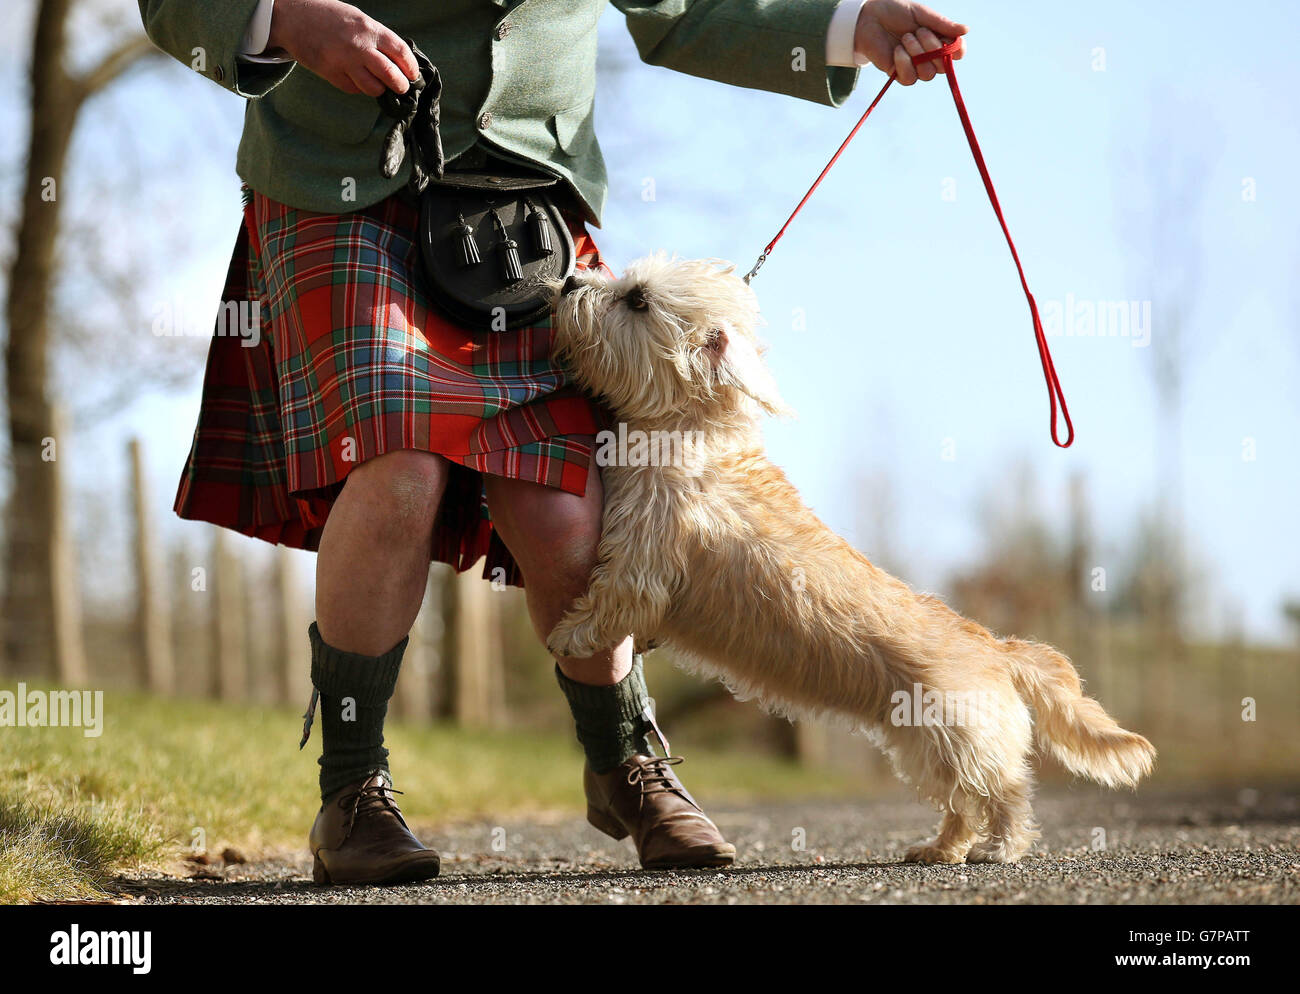 Kenny Allan, from Eyemouth, with Buzet the Dandie Dinmont Terrier, as they visit Sir Walter Scotts home at Abbotsford, Melrose, in the Scottish Borders, on the 200th anniversary of the publication of the book Guy Mannering which gave the breed its distinctive name. Stock Photo